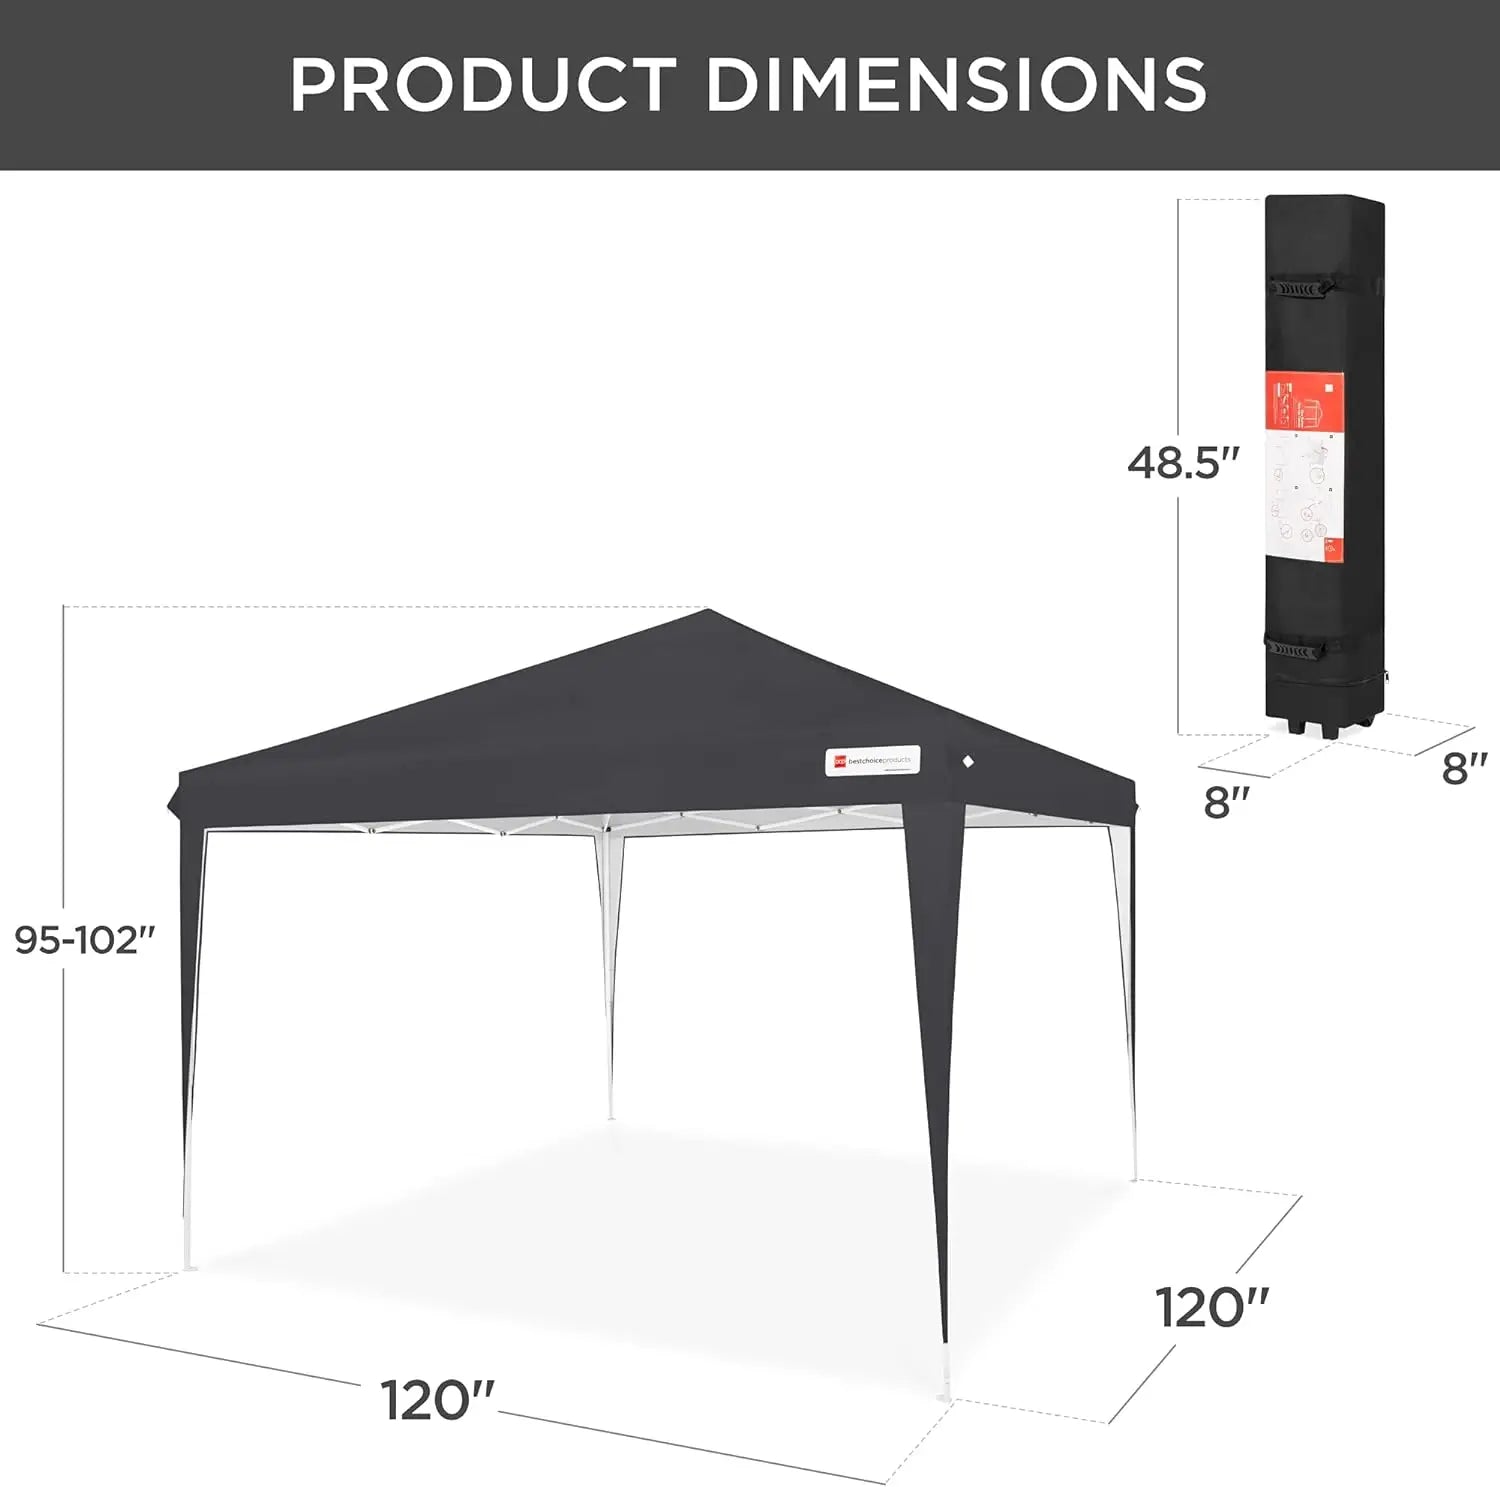 10x10ft Pop Up Canopy Outdoor Portable Folding Instant Lightweight Gazebo Shade Tent w/Adjustable Height